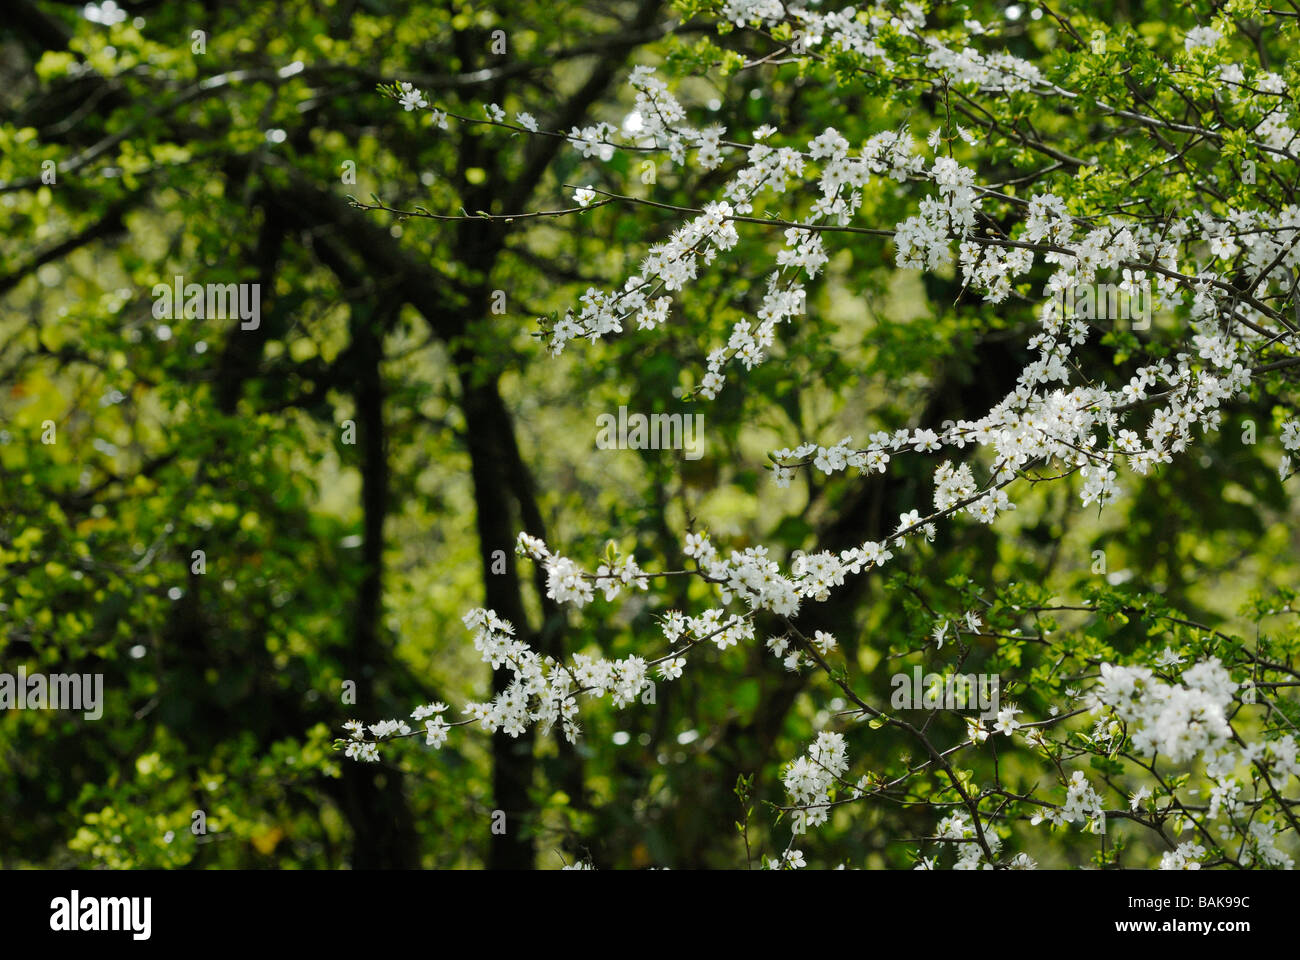 Blackthorn Prunus spinosa blossom in Spring set against the green of new Hawthorn leaves, Wales, UK. Stock Photo